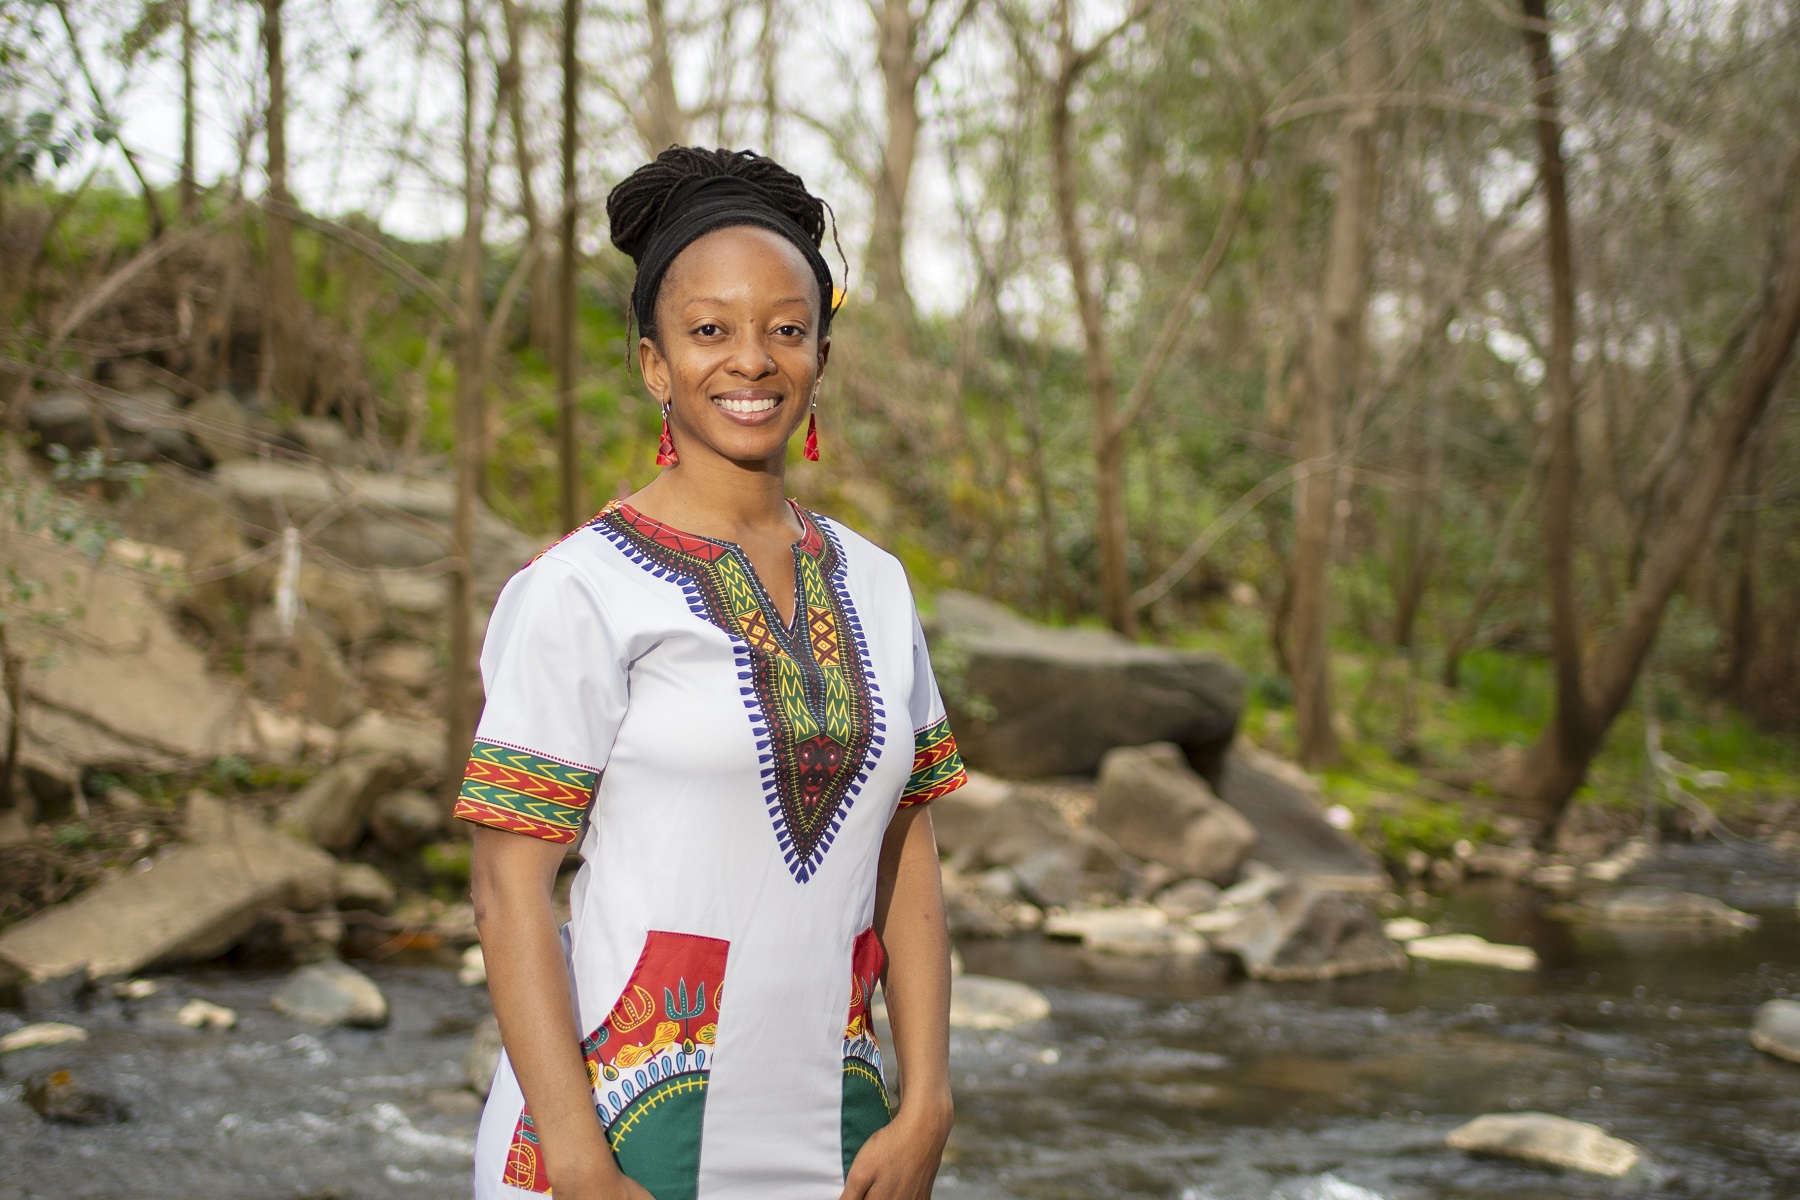 Tamara Williams received an ASC Cultural Vision Grant to support the first annual LAVAGEM! African-Brazilian Festival.